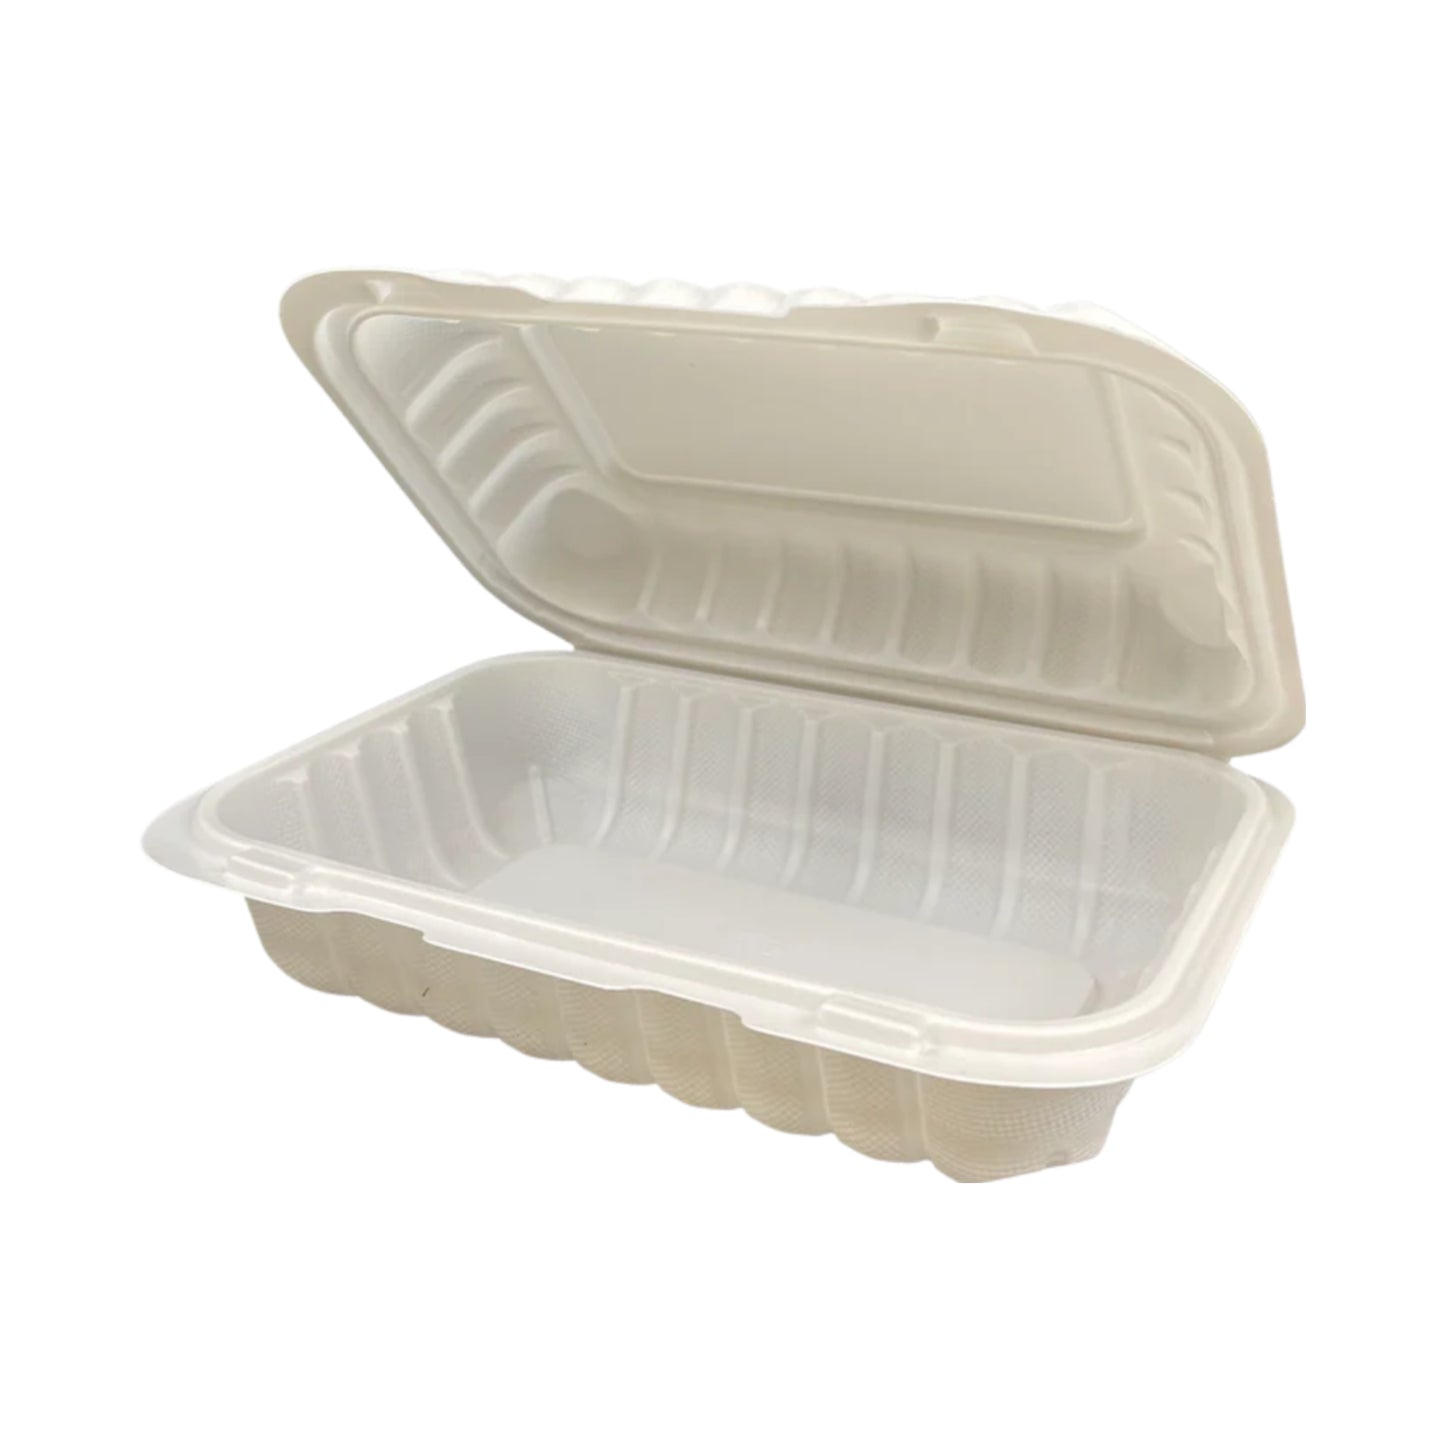 KIS-PP205G | 9x6x3 inches, 1-Compartment, PP Clamshell Food Container; $0.205/pc